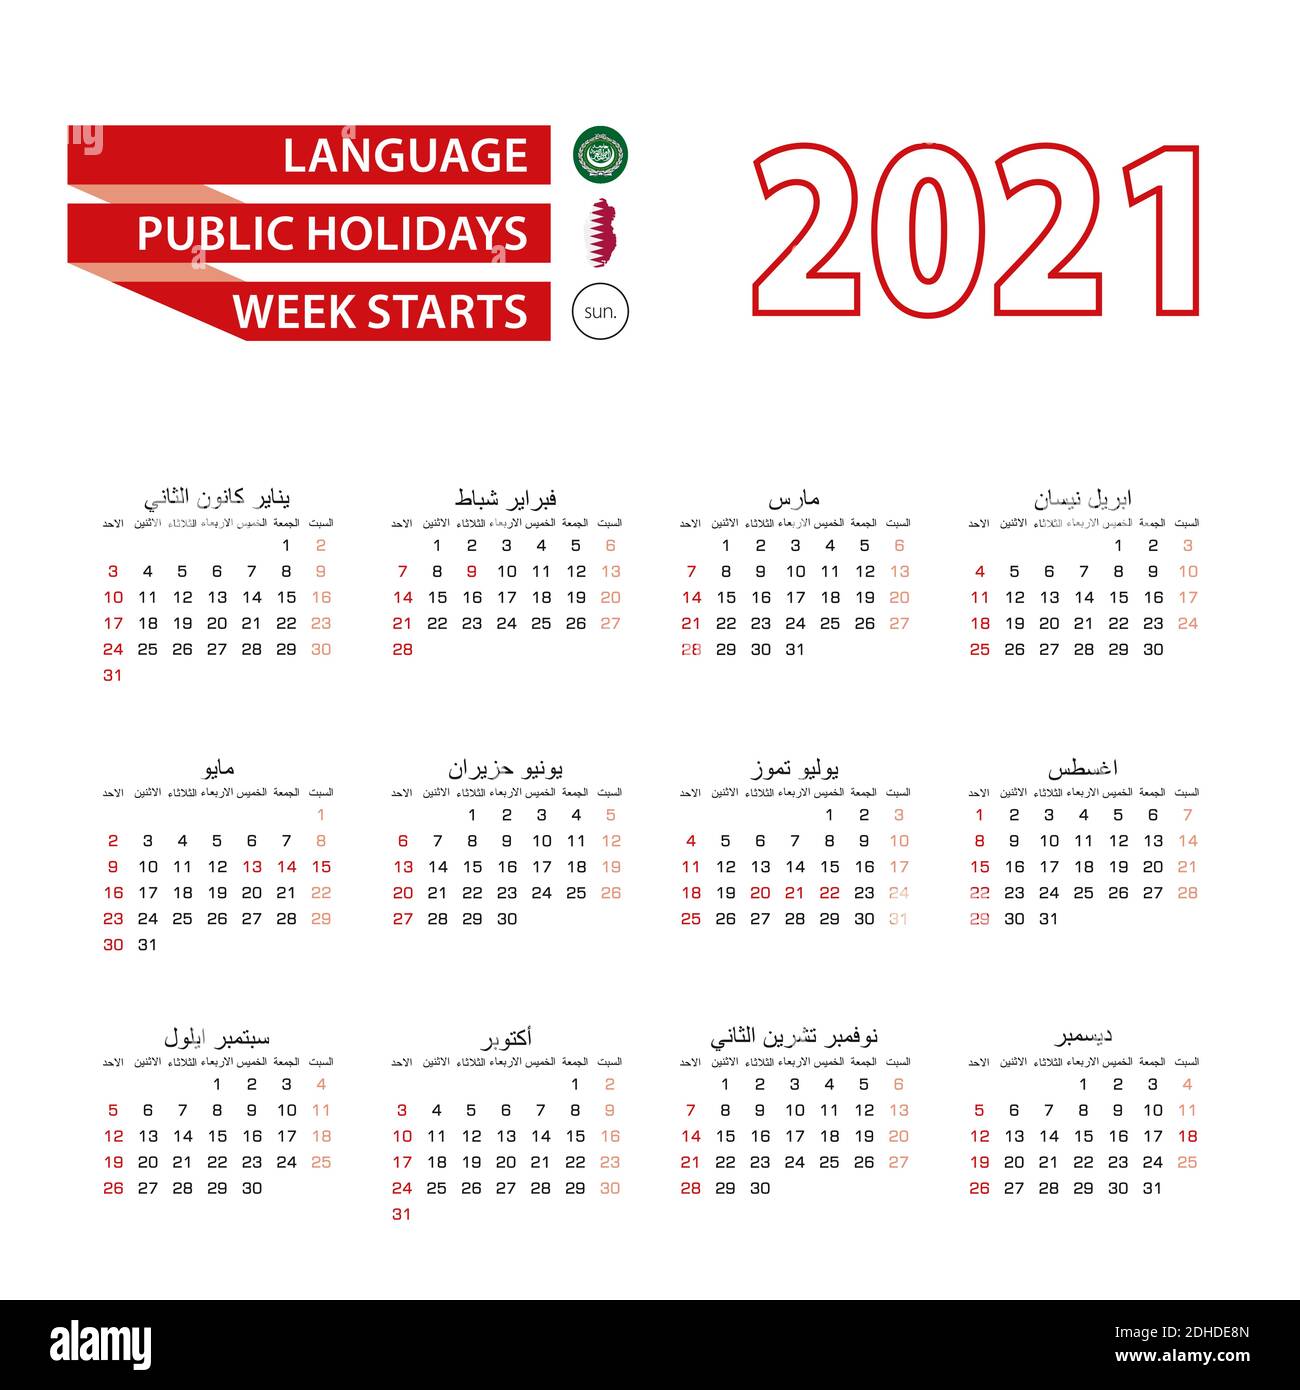 Calendar 2021 In Arabic Language With Public Holidays The Country Of Qatar In Year 2021 Week Starts From Sunday Vector Illustration Stock Vector Image Art Alamy